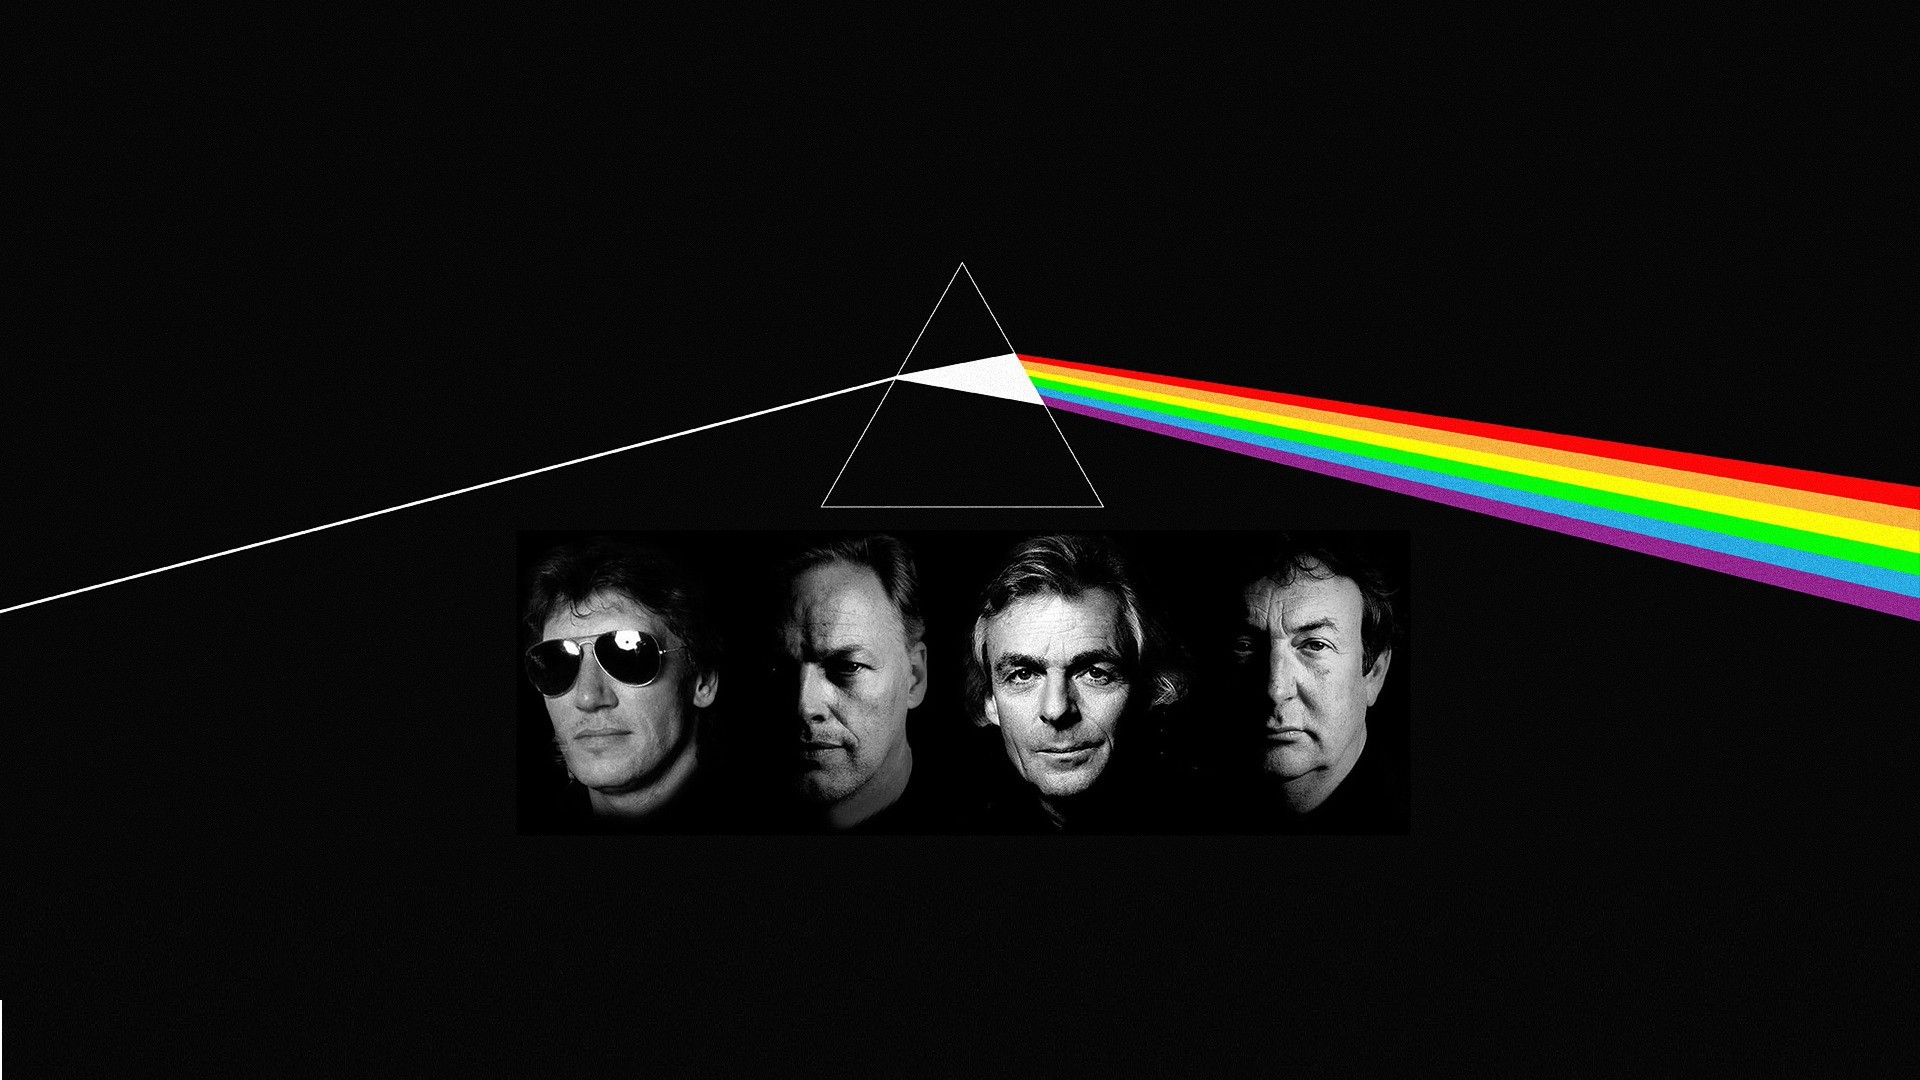 General 1920x1080 Pink Floyd band music men face triangle black background simple background geometric figures The Dark Side of the Moon